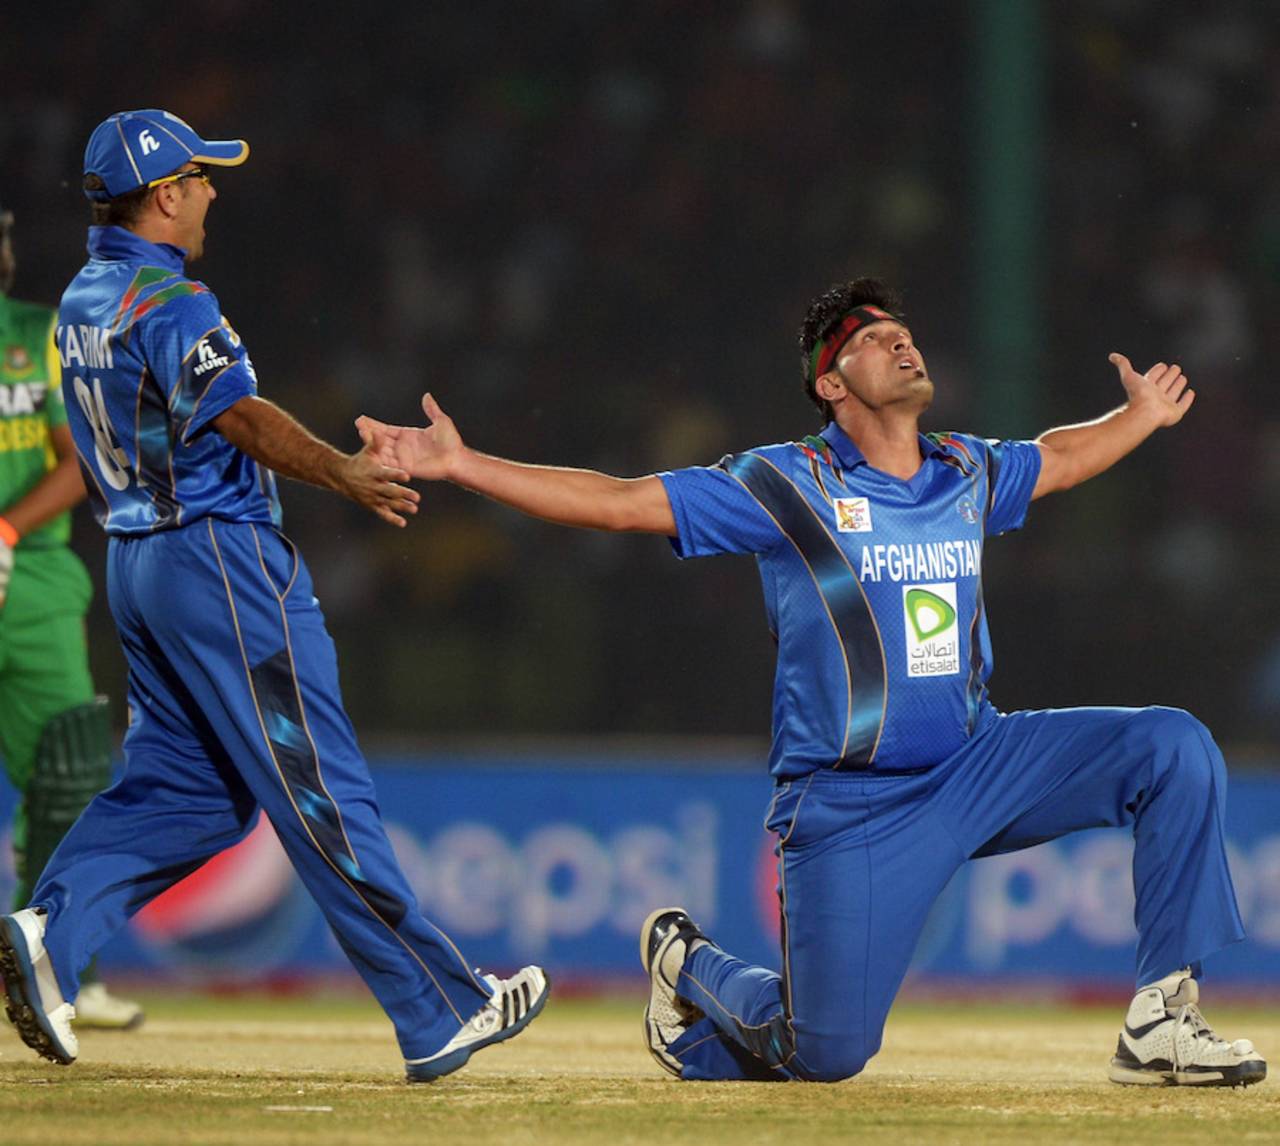 Afghanistan will be hoping fast bowler Hamid Hassan can make it through the series injury-free&nbsp;&nbsp;&bull;&nbsp;&nbsp;AFP